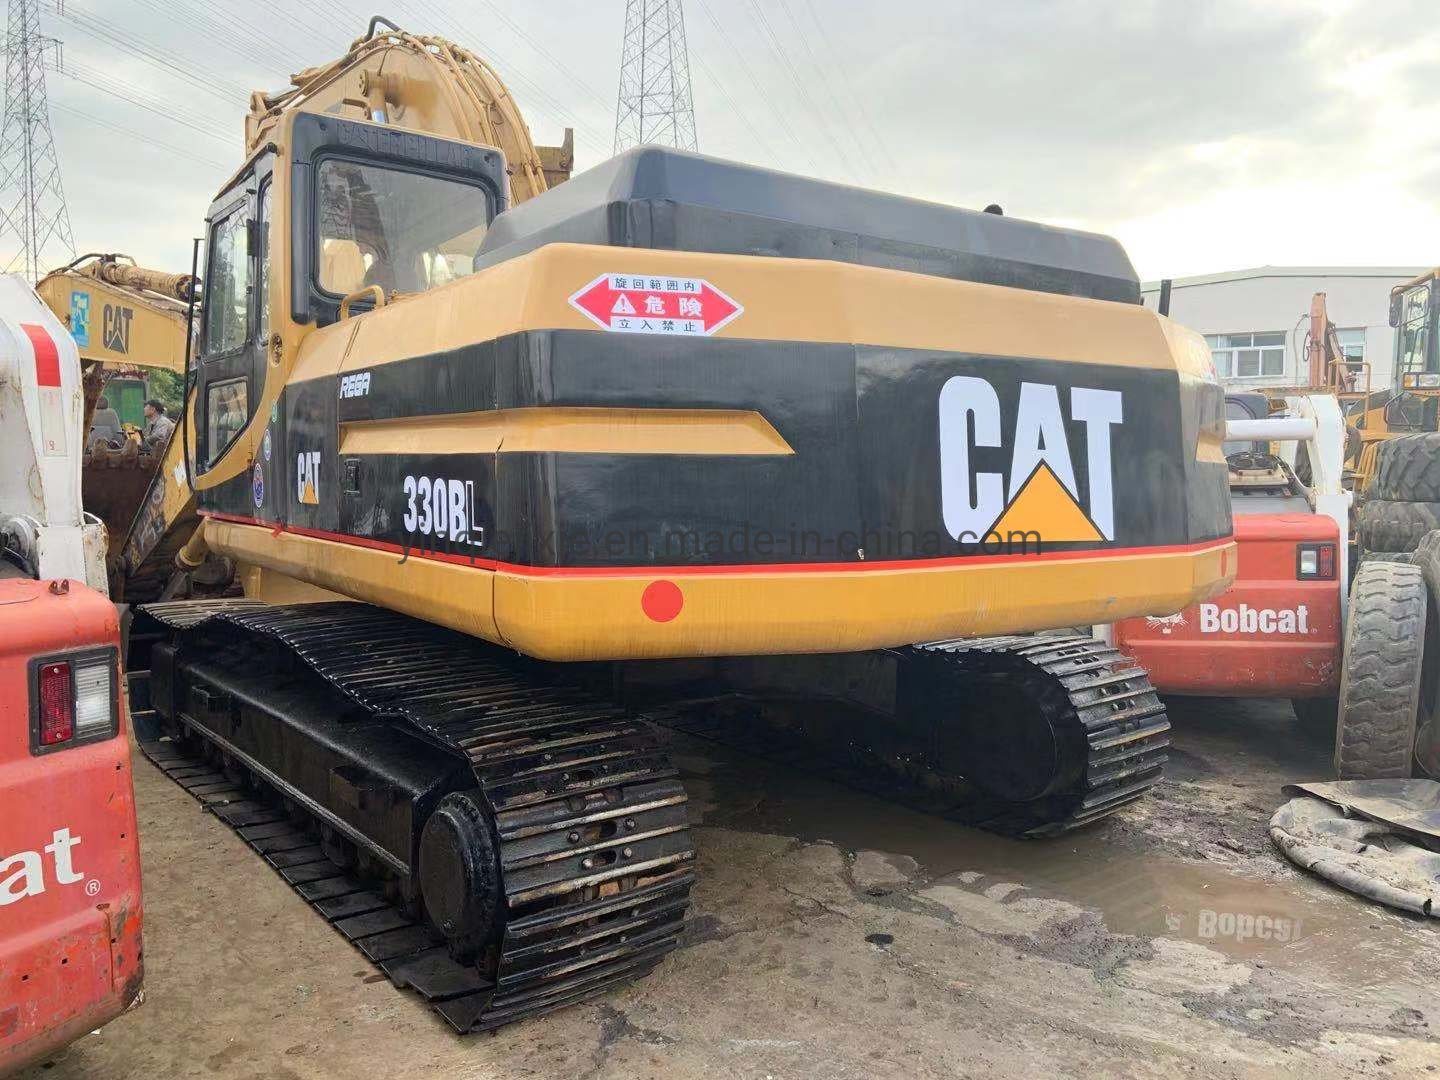 Used Caterpillar Excavator 330bl with Wide Track Shoe for Sale